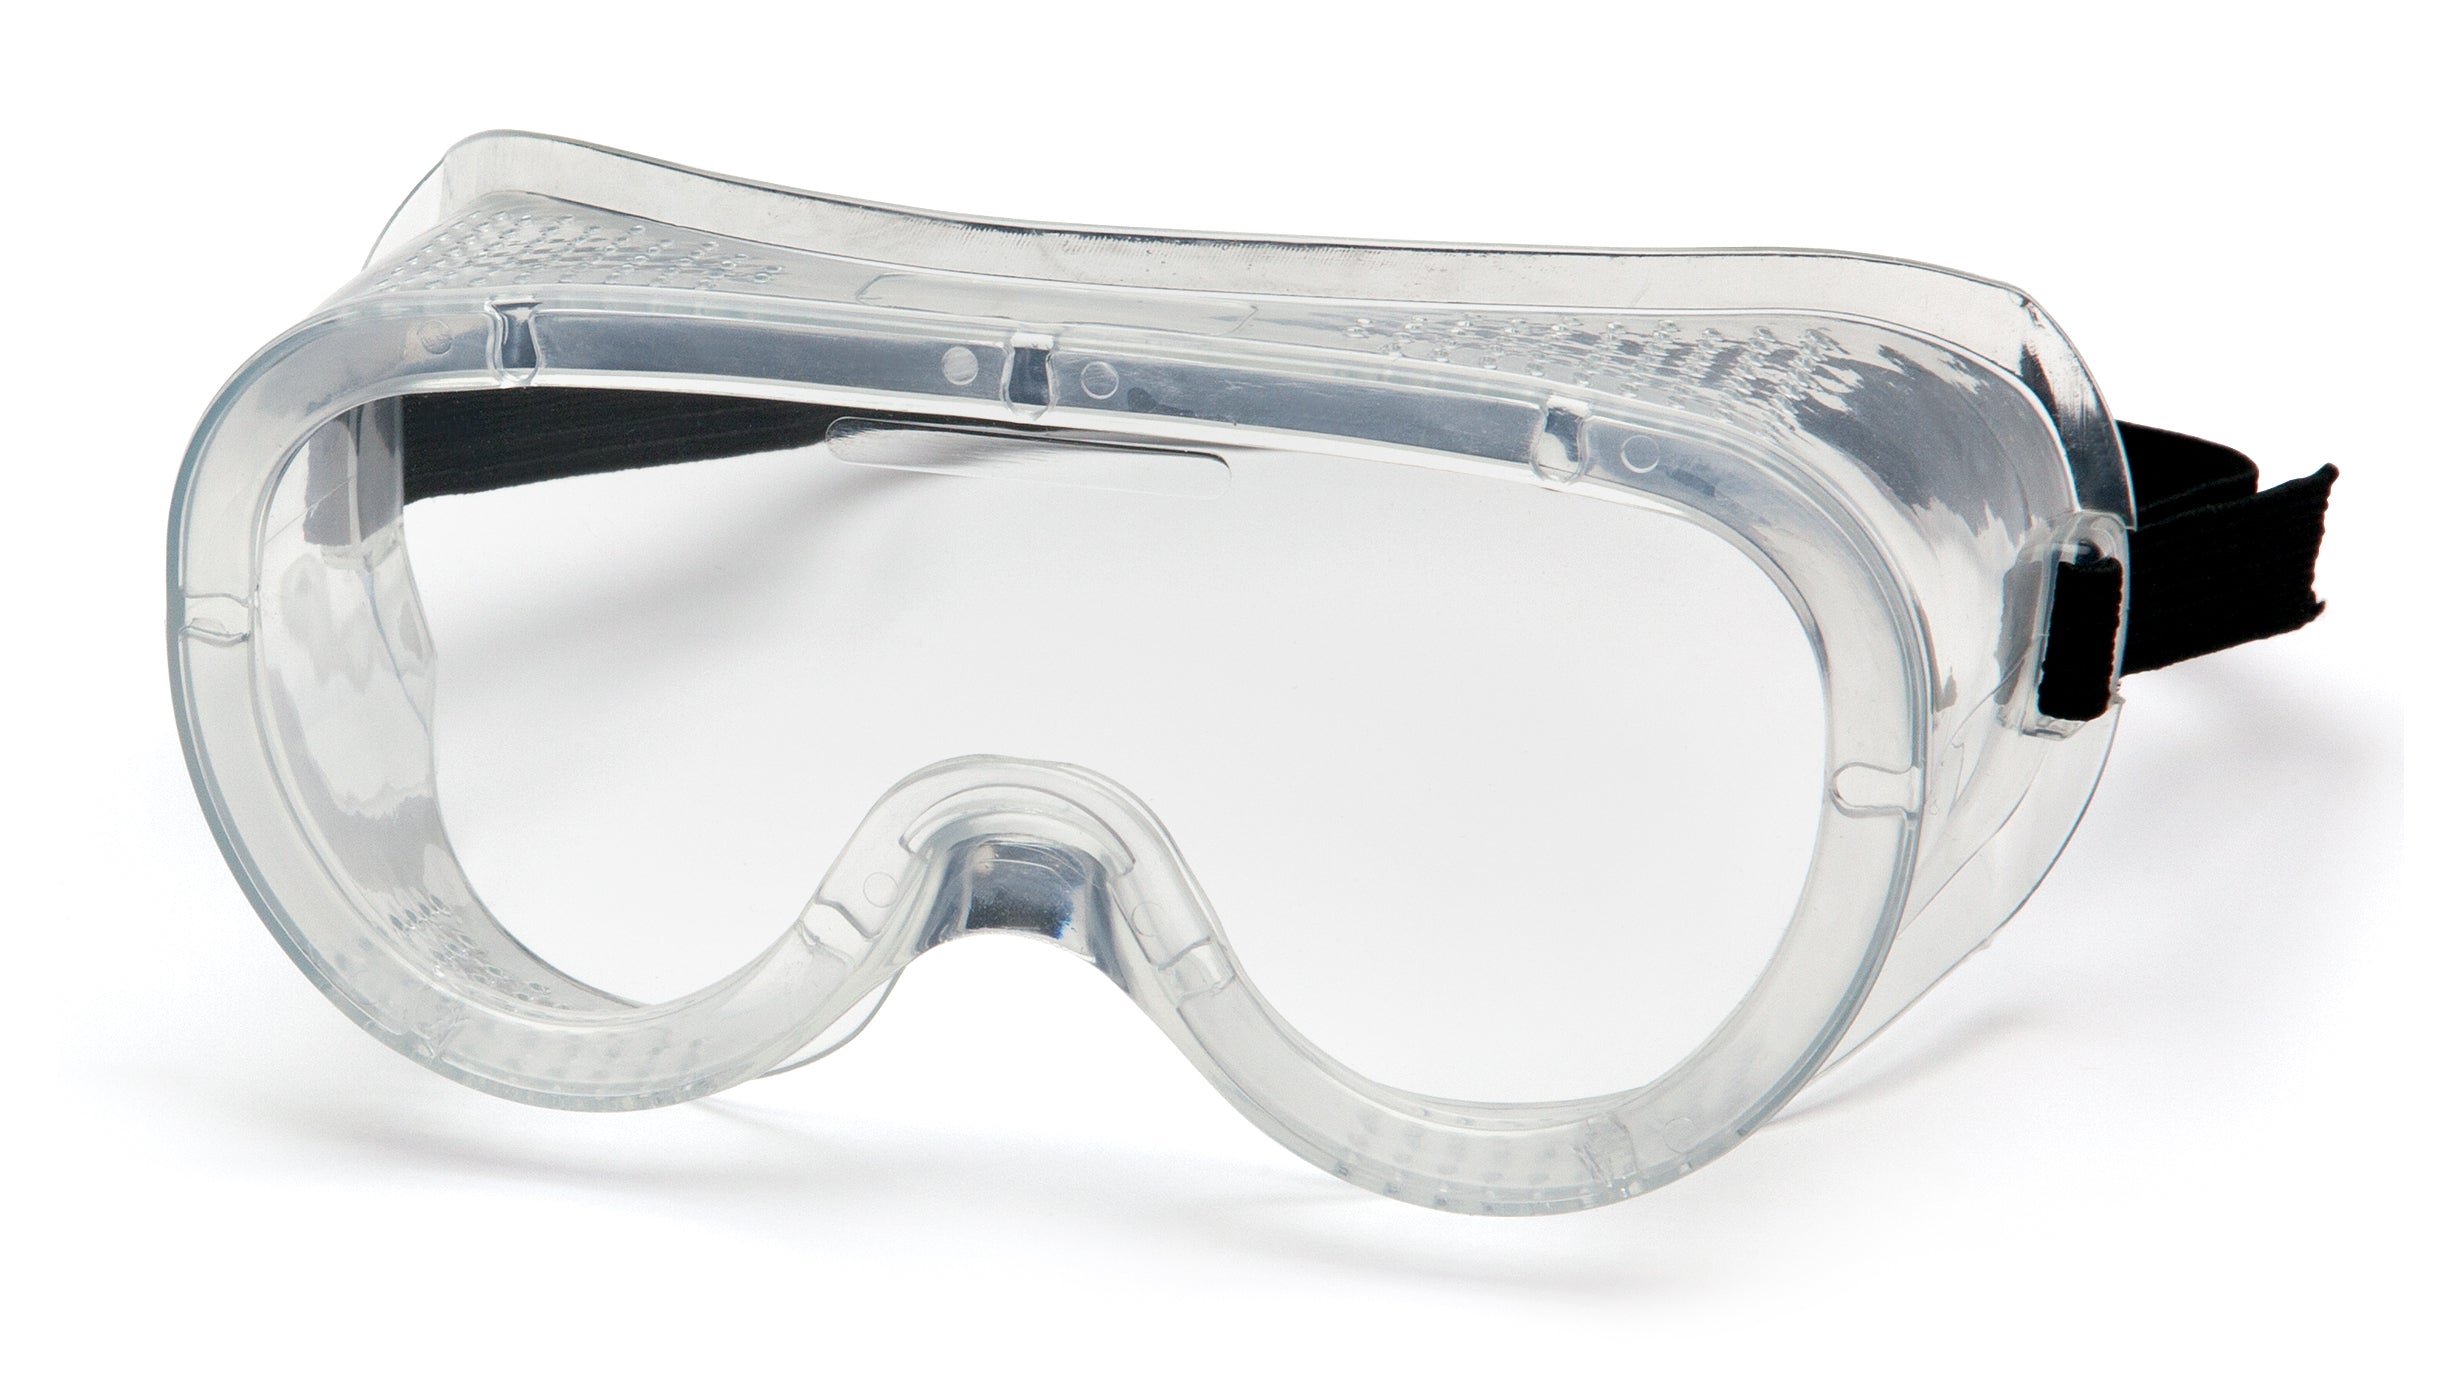 PYRAMEX G201 Safety Goggles - Perforated Indirect Vents